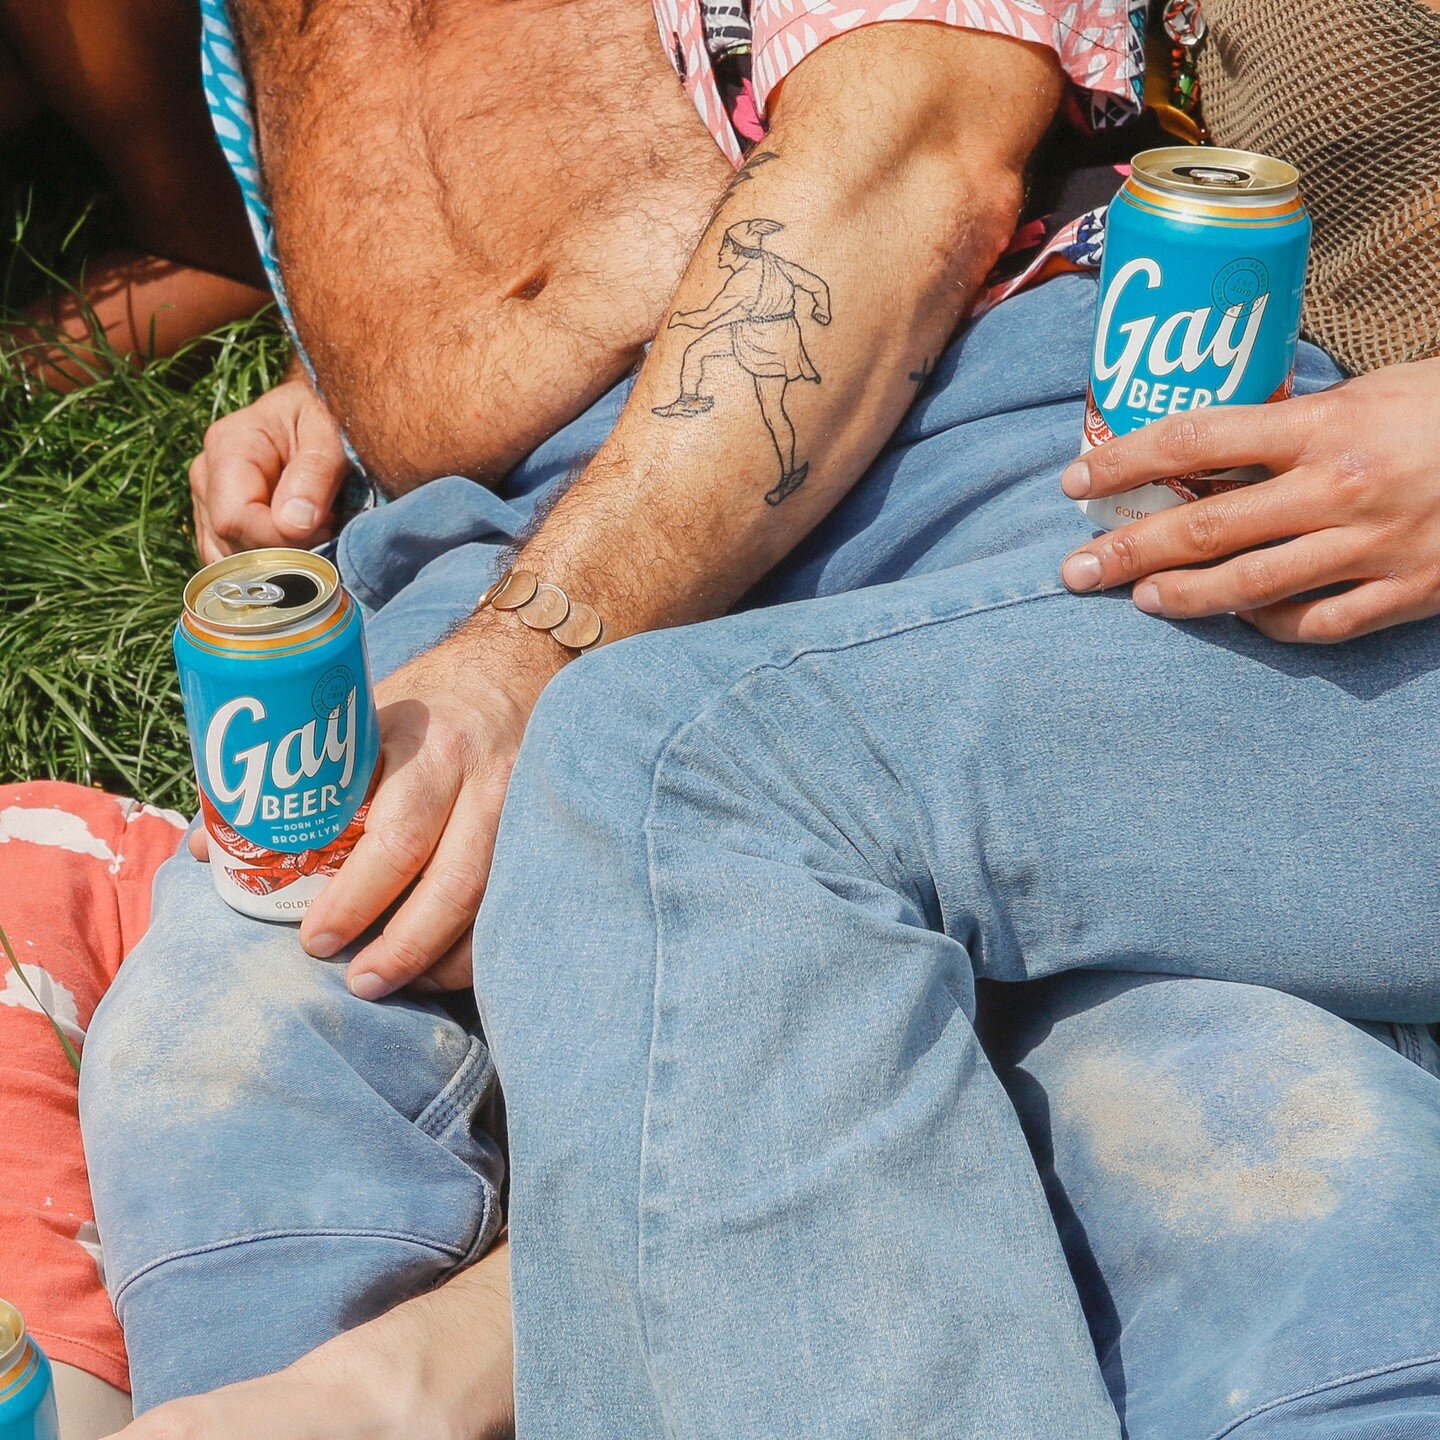 Another beautiful Summer weekend has arrived! Get tangled up with Gay Beer in the sun! Tap the link in our bio to order. // #Summerofpride #gaybeer #gay #beer #craftbeer #summer #lgbtq #friends #community